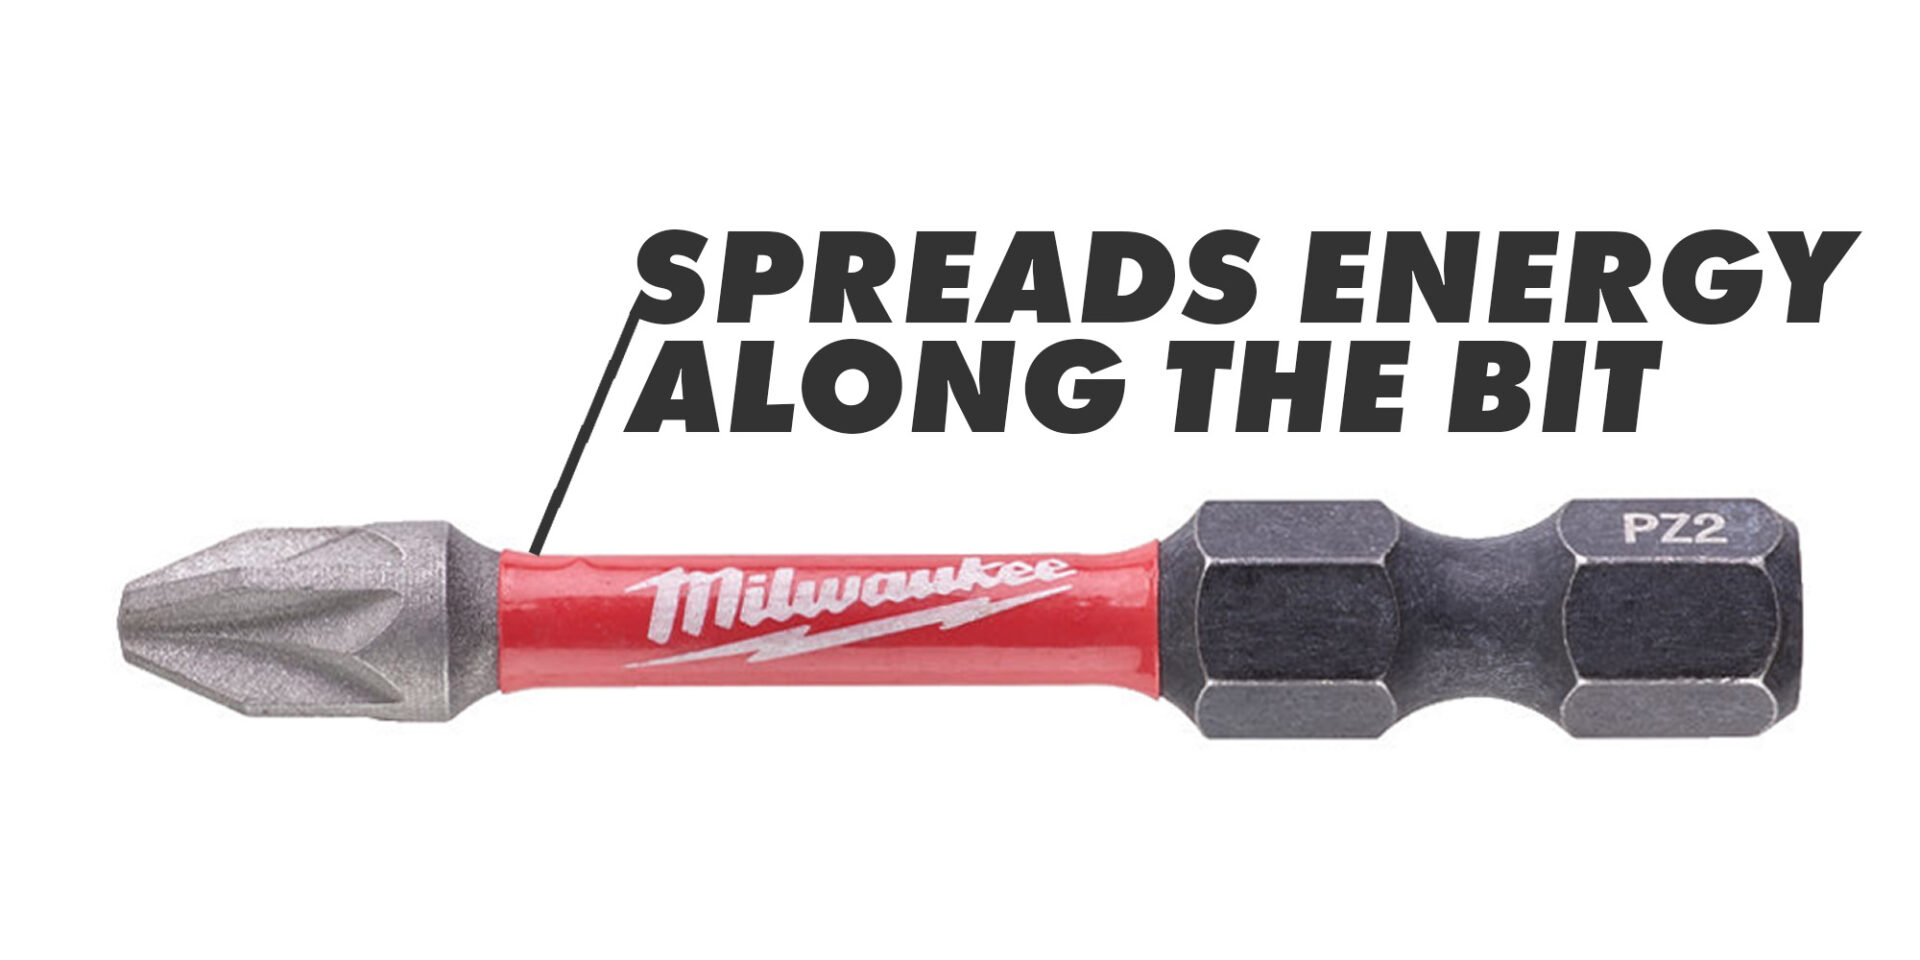 a milwaukee shockwave impact bit with the text spreads energy along the bit in text